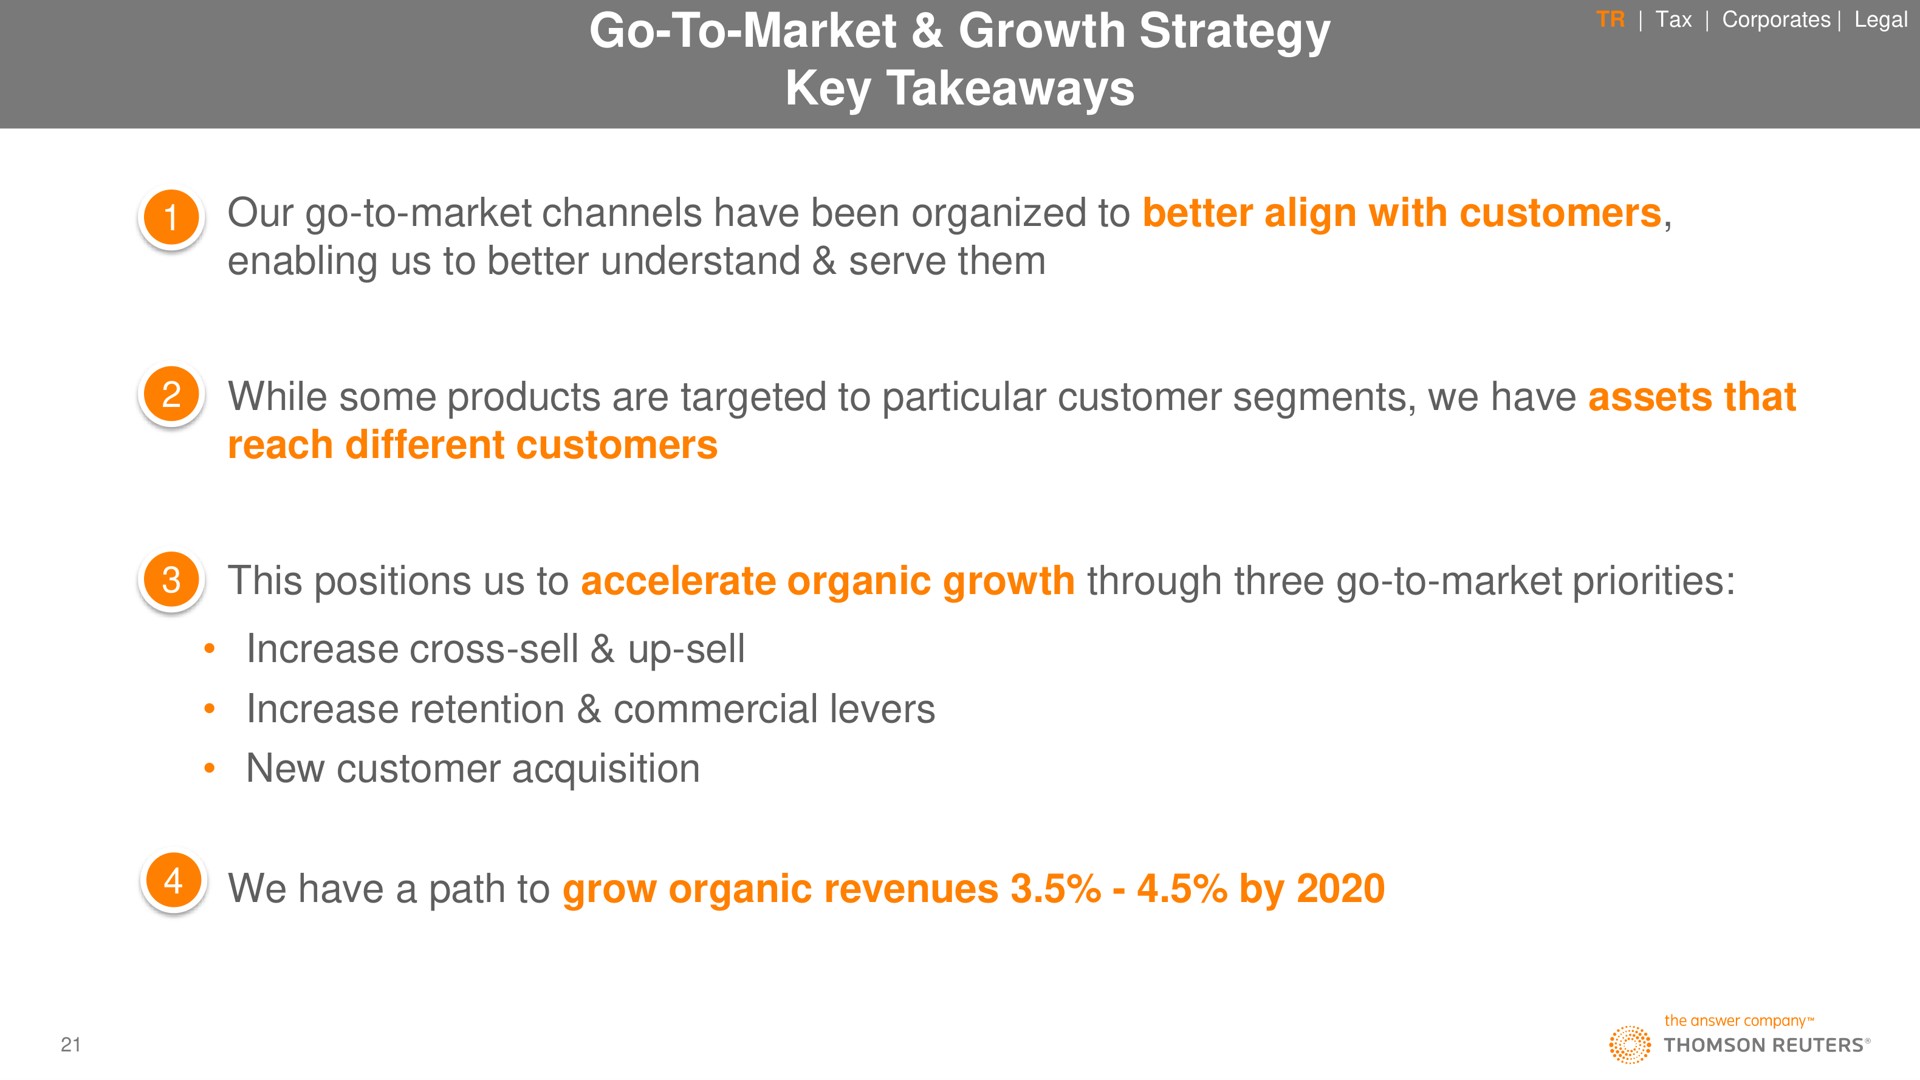 go to market growth strategy key our go to market channels have been organized to better align with customers enabling us to better understand serve them while some products are targeted to particular customer segments we have assets that reach different customers this positions us to accelerate organic growth through three go to market priorities increase cross sell up sell increase retention commercial levers new customer acquisition we have a path to grow organic revenues by mes nese | Thomson Reuters